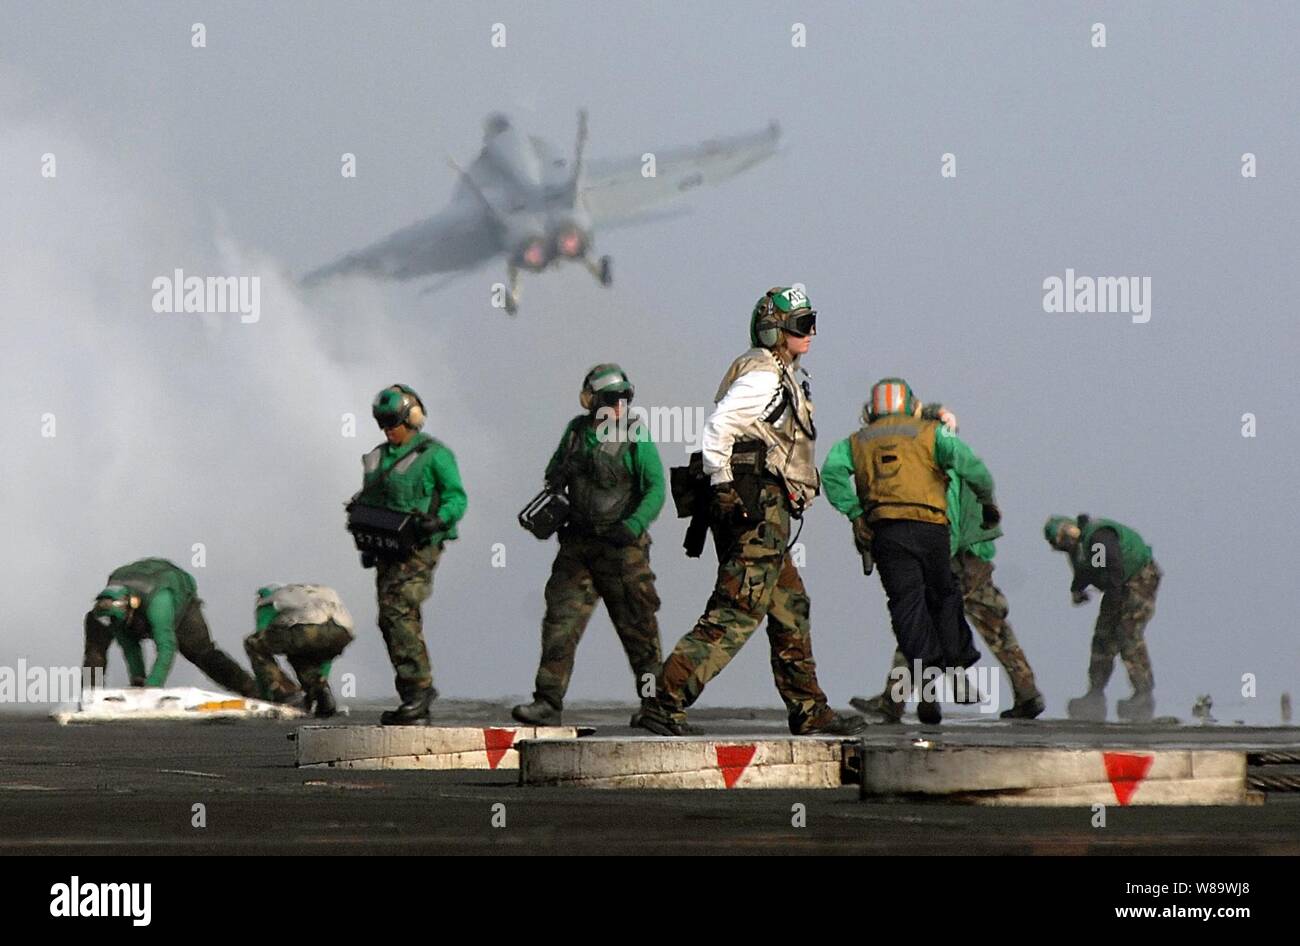 U.S. Navy flight deck personnel prepare to launch the next aircraft in the launch cycle after successfully catapulting an F/A-18 Hornet aircraft from the aircraft carrier USS Harry S. Truman (CVN 75) during flight operations in the Persian Gulf on March 26, 2008.  Truman and embarked Carrier Air Wing 3 are deployed supporting Operations Iraqi Freedom, Enduring Freedom and maritime security operations. Stock Photo